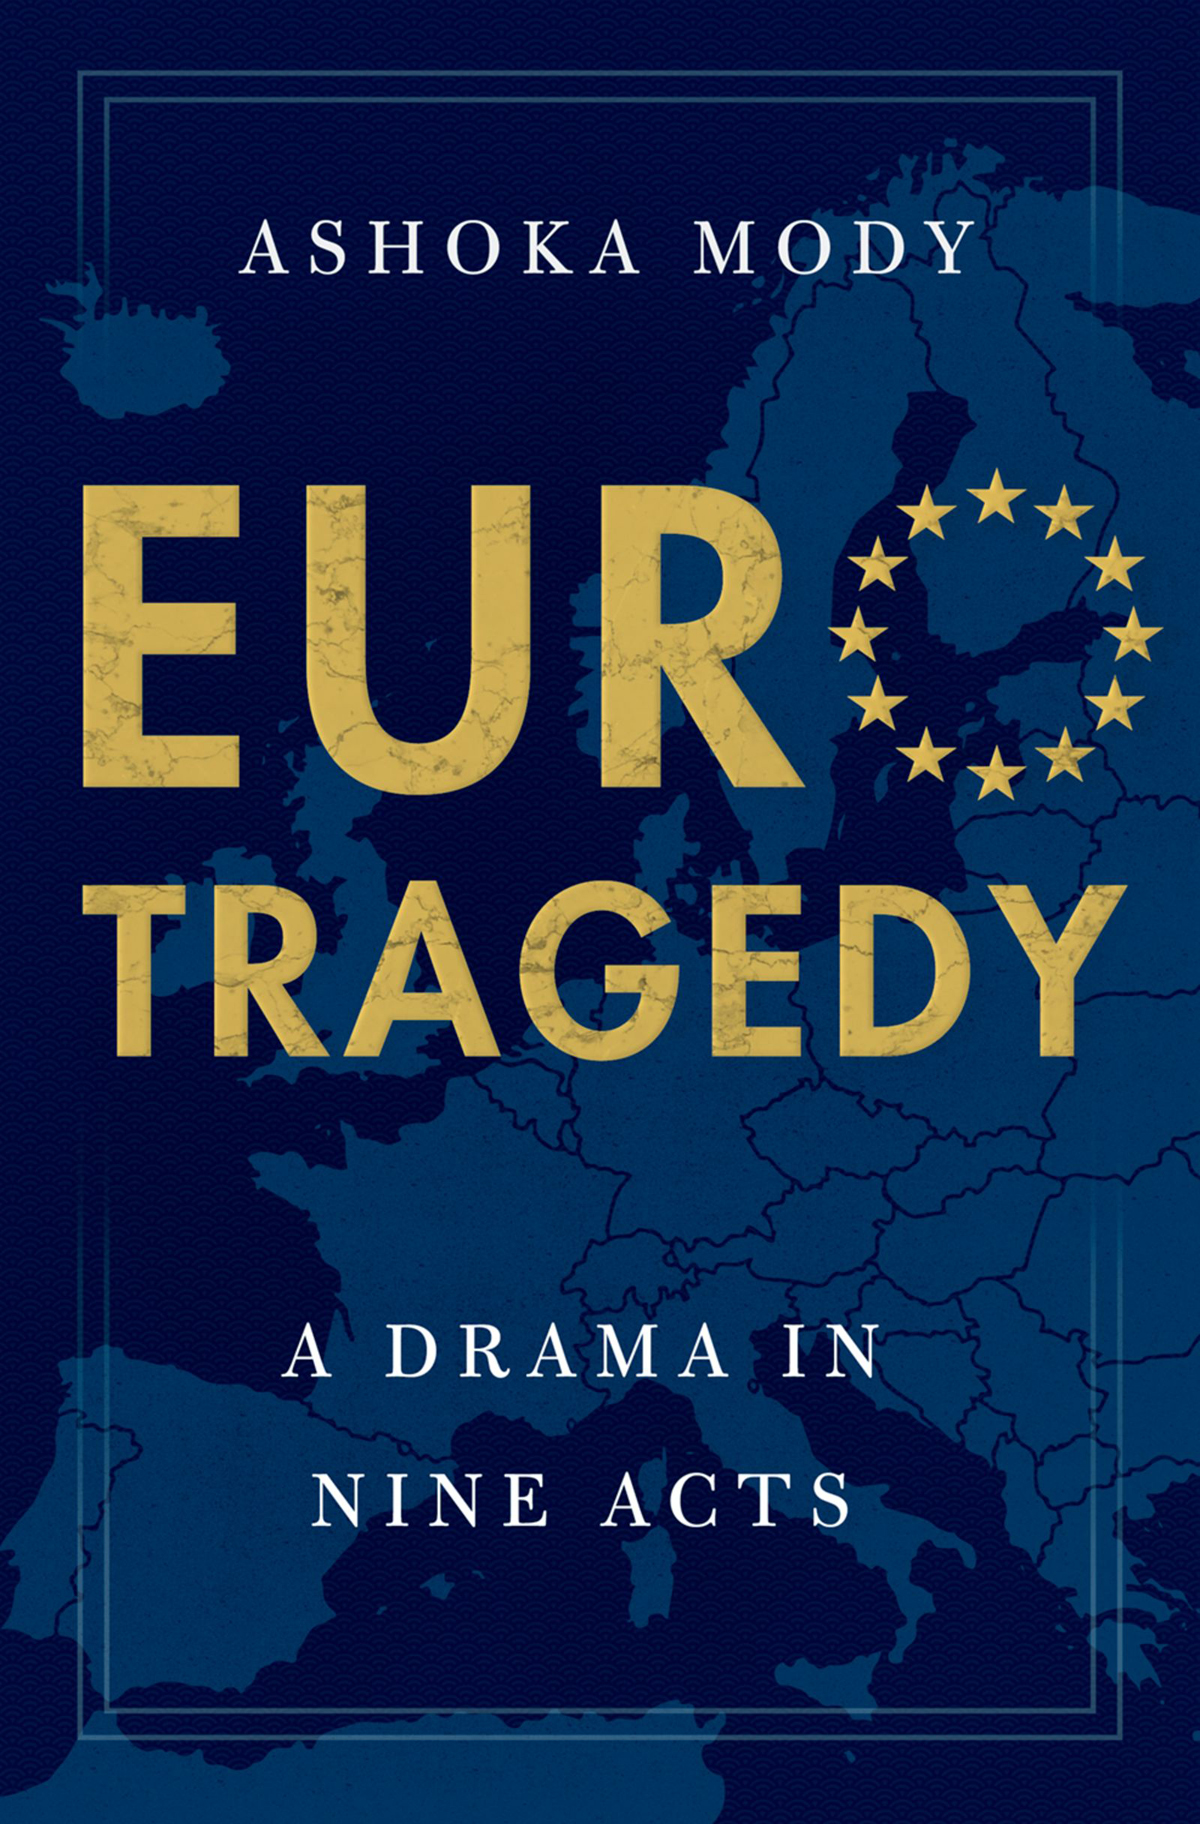 EuroTragedy A Drama in Nine Acts - image 1